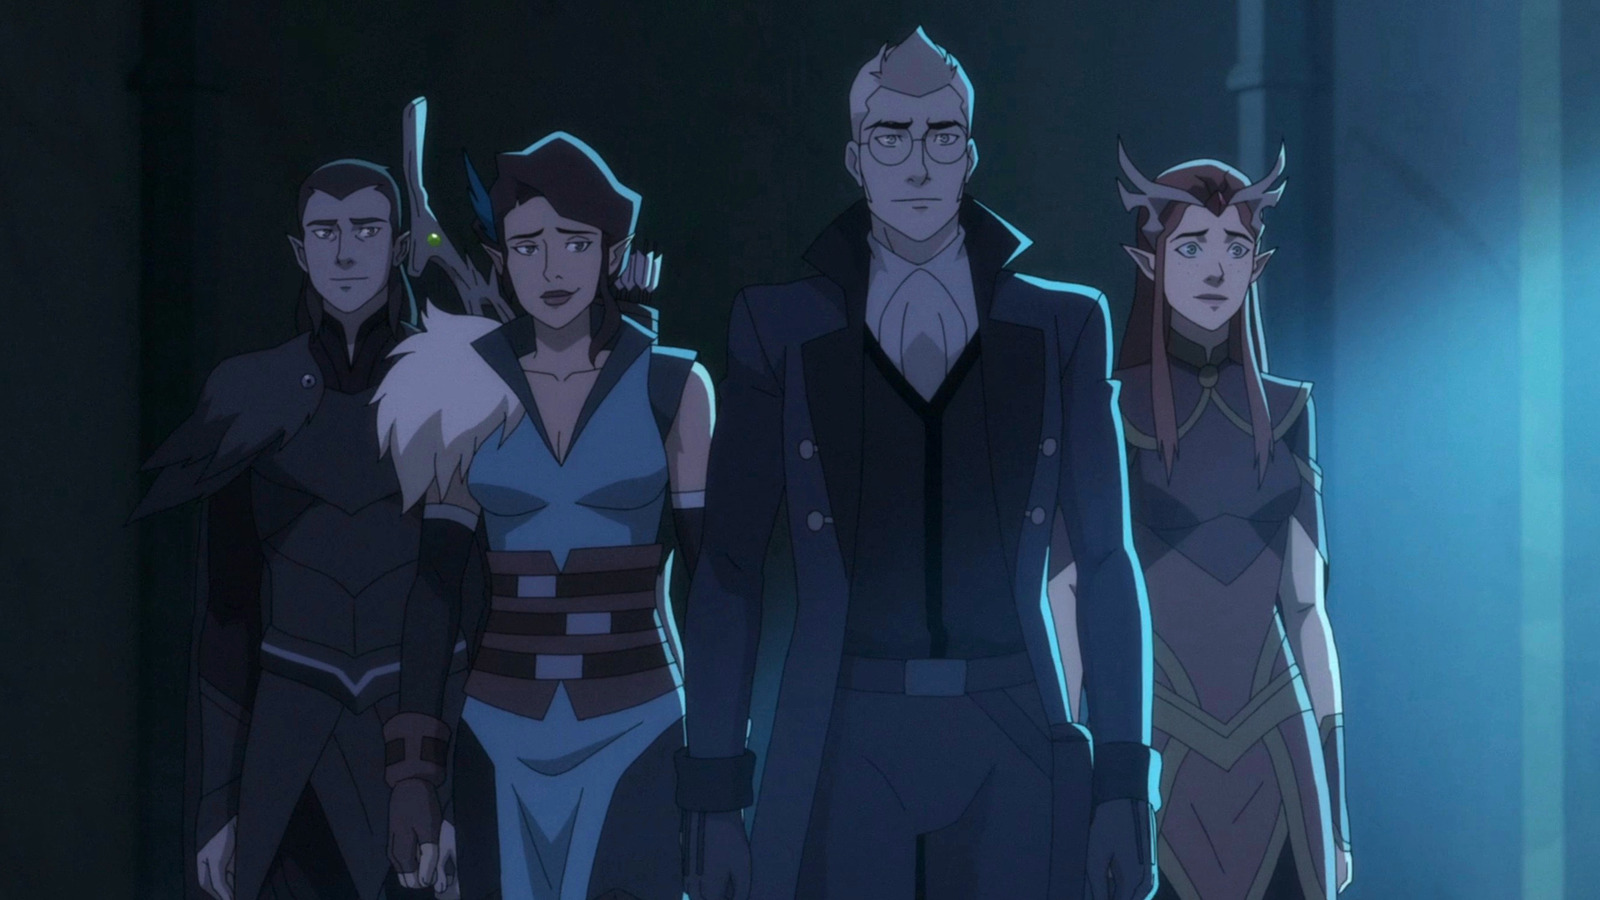 Vox Machina Season 3: Release, Cast, and Everything We Know So Far